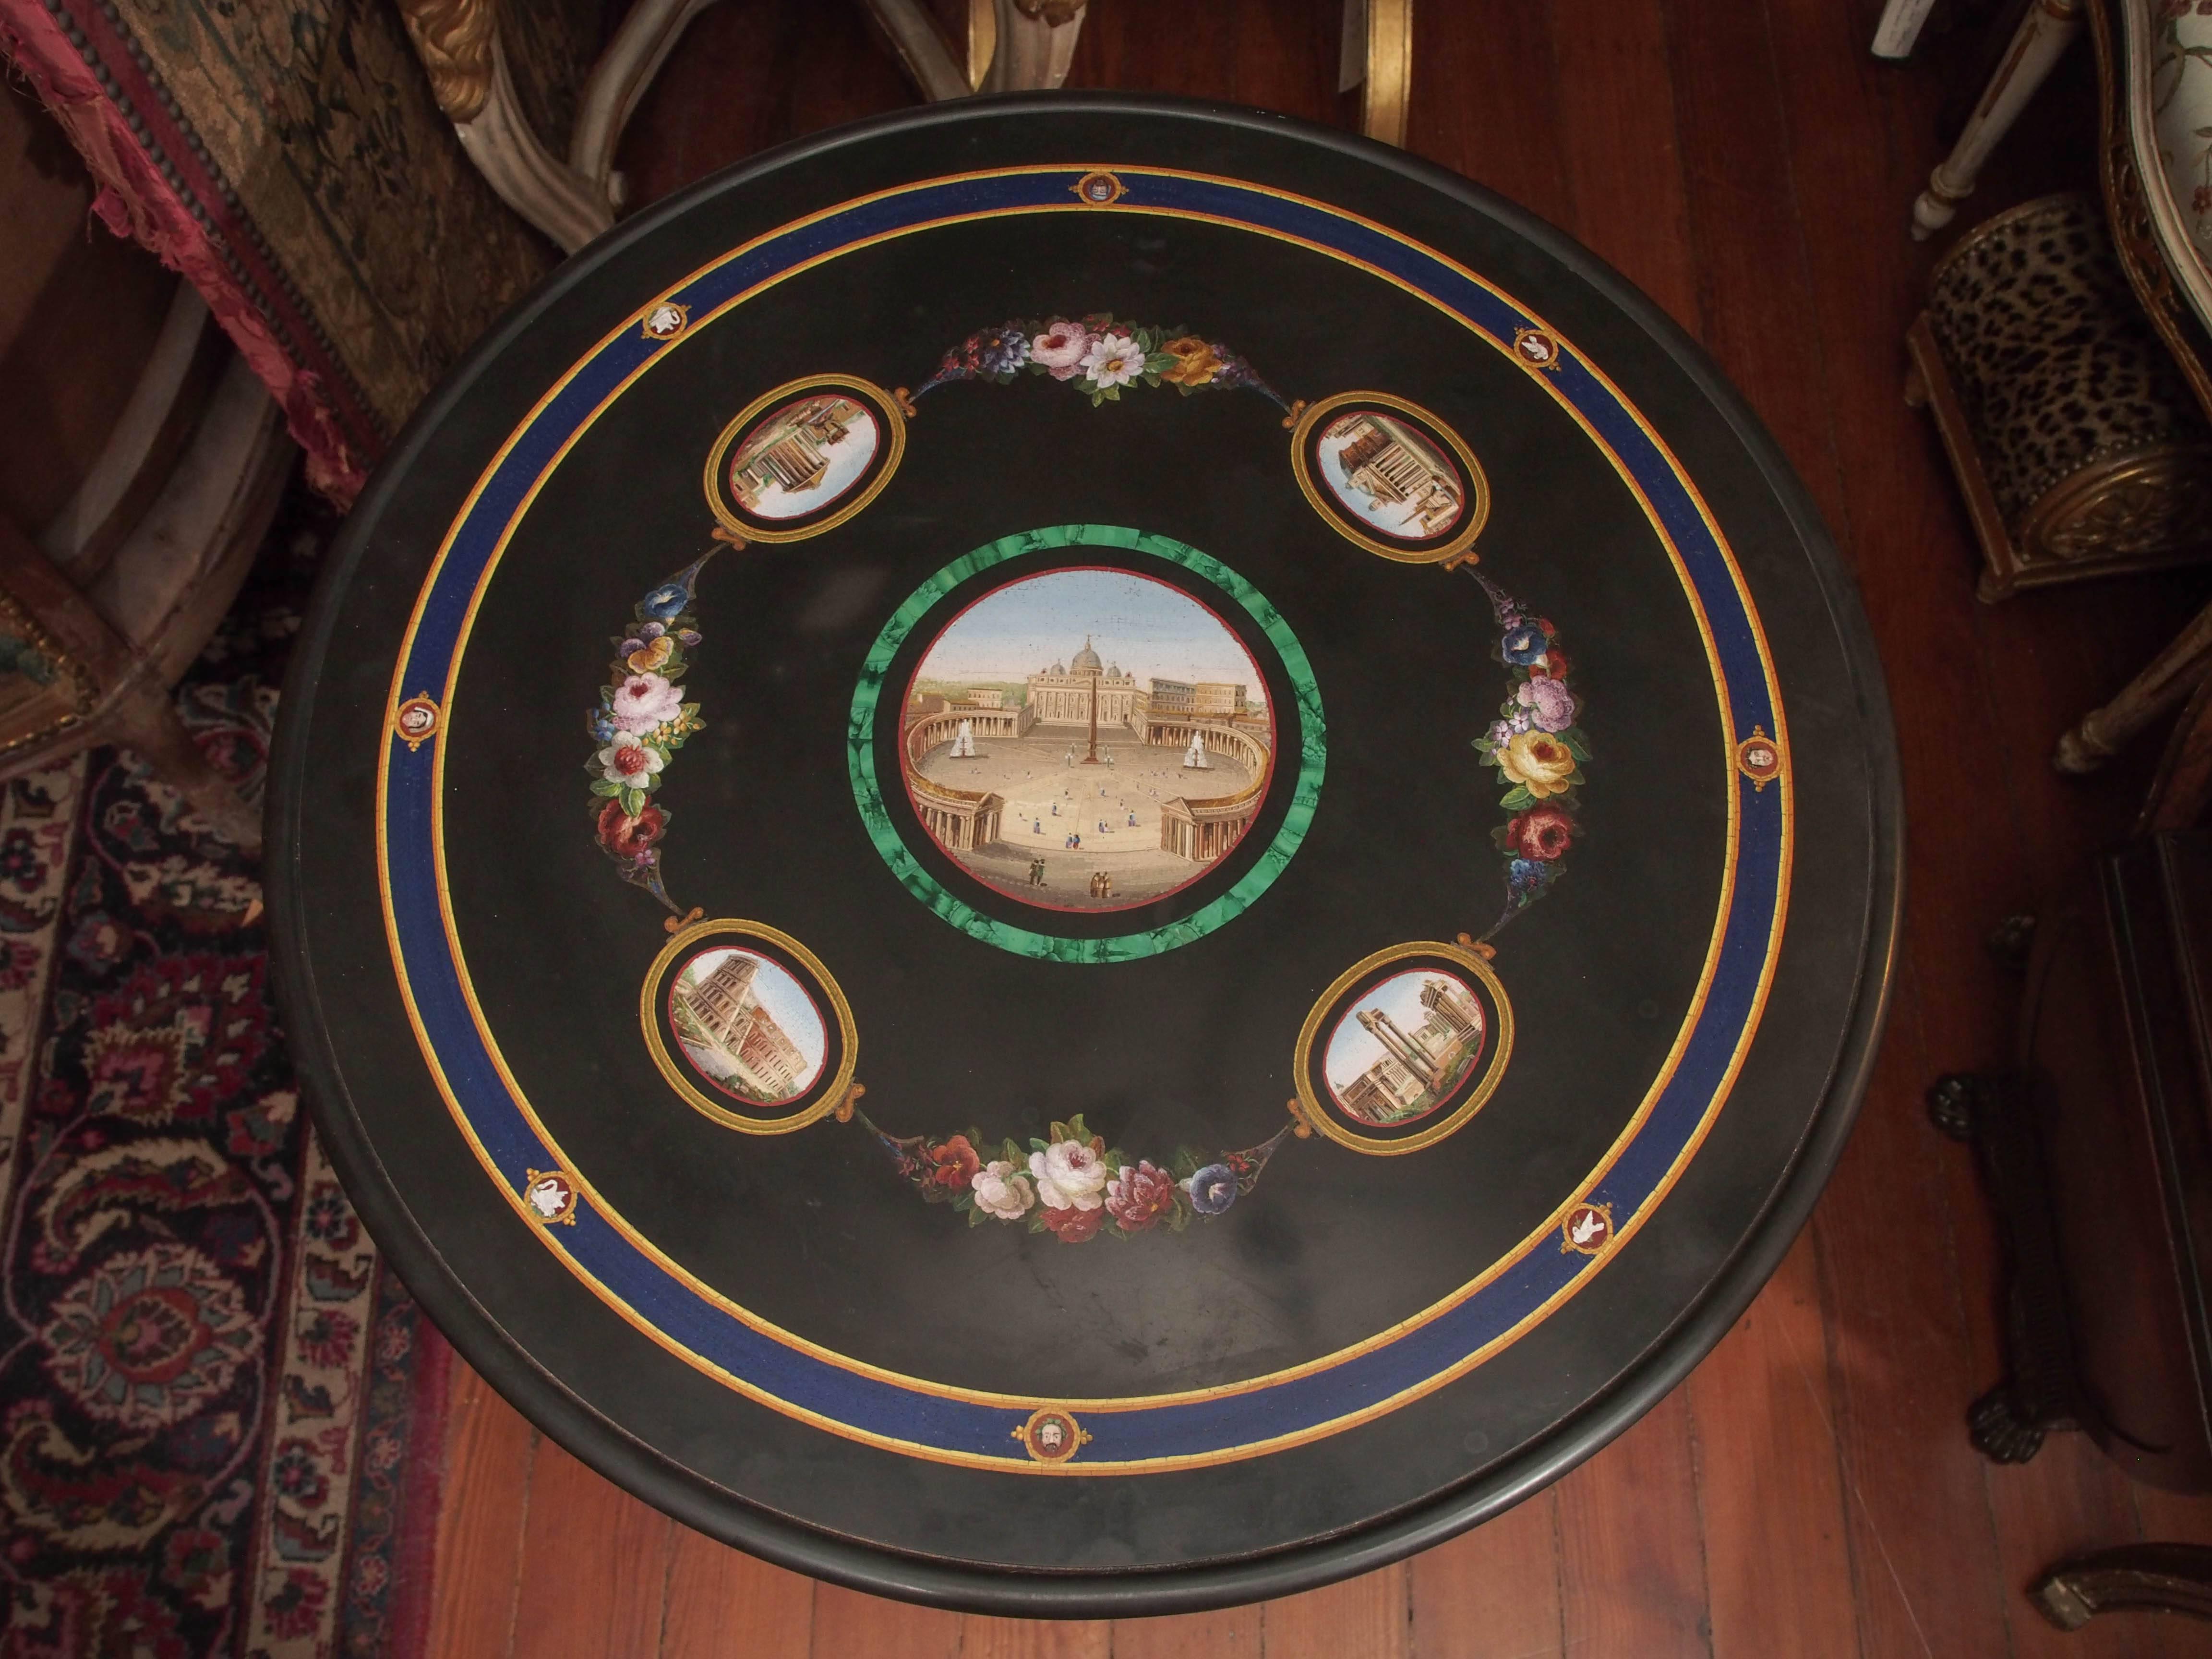 19th century Italian Micro Mosaic table with five scenes. Central scene is Saint Peters Basilica surrounded by a malachite band and four surrounding of The Collosseum, The Forum, The Pantheon and The Temple of Hercules the victor all connected by